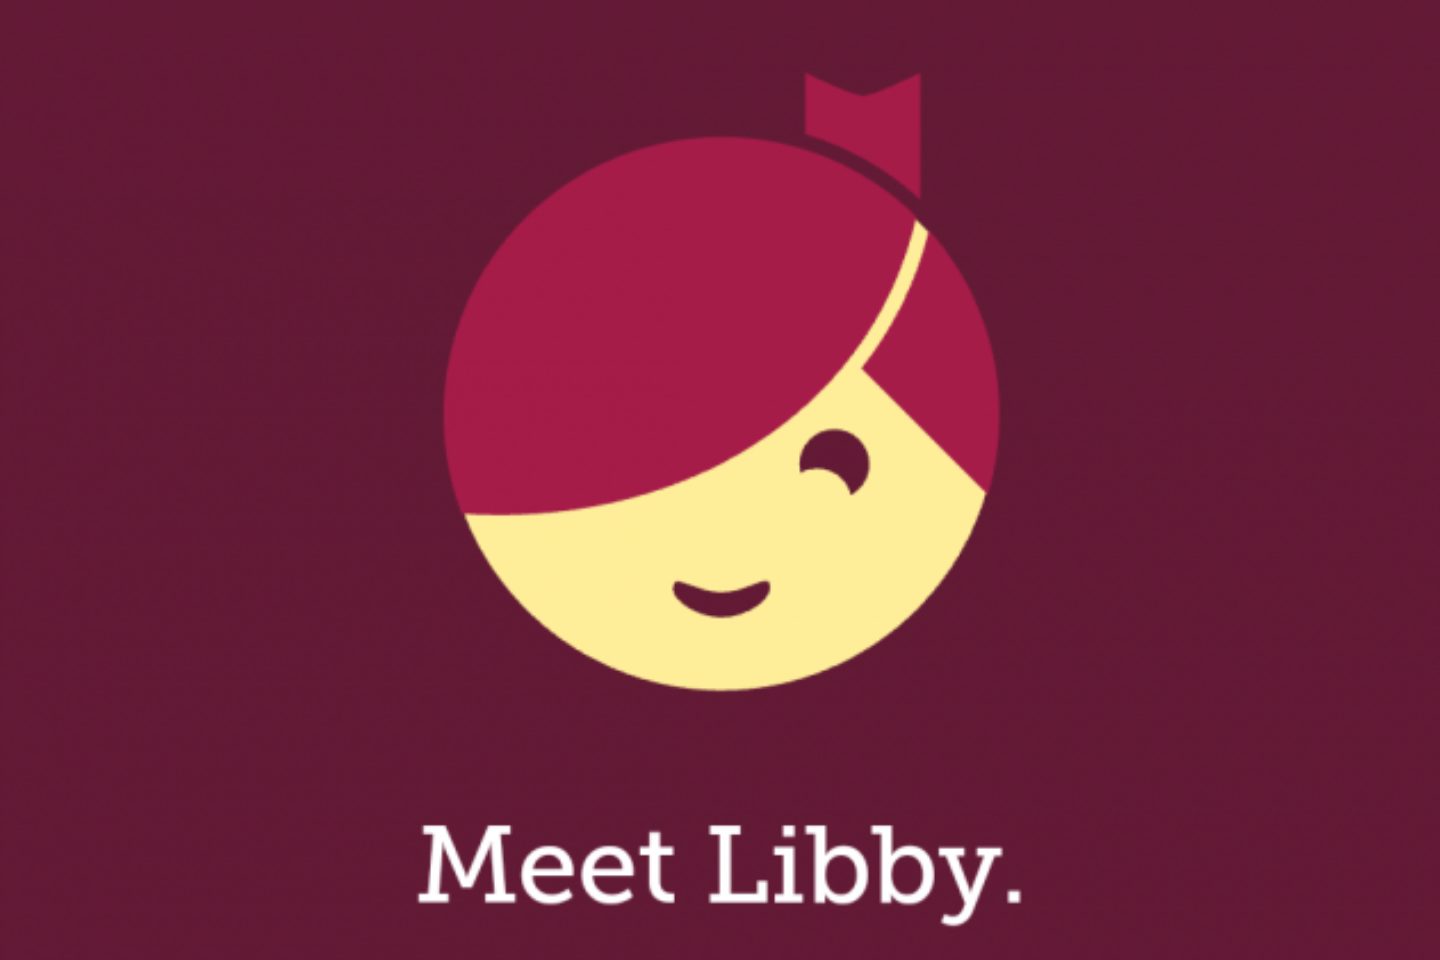 Give Libby a Try!